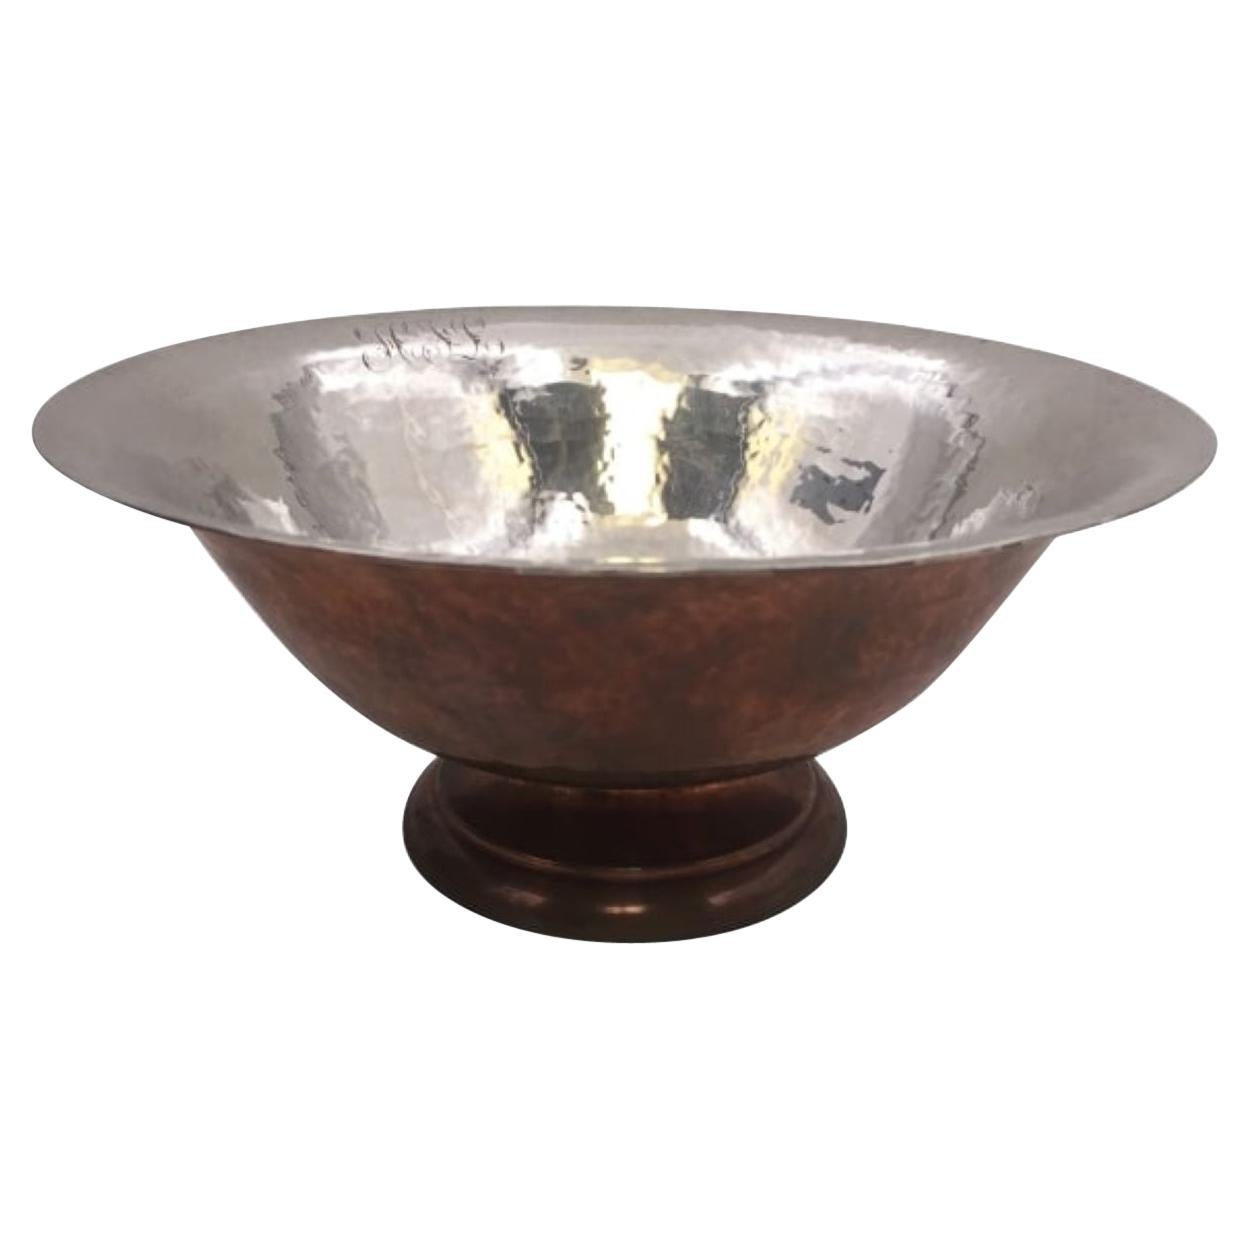 Hand Hammered Sterling Silver and Copper Centerpiece Bowl by Gebelien